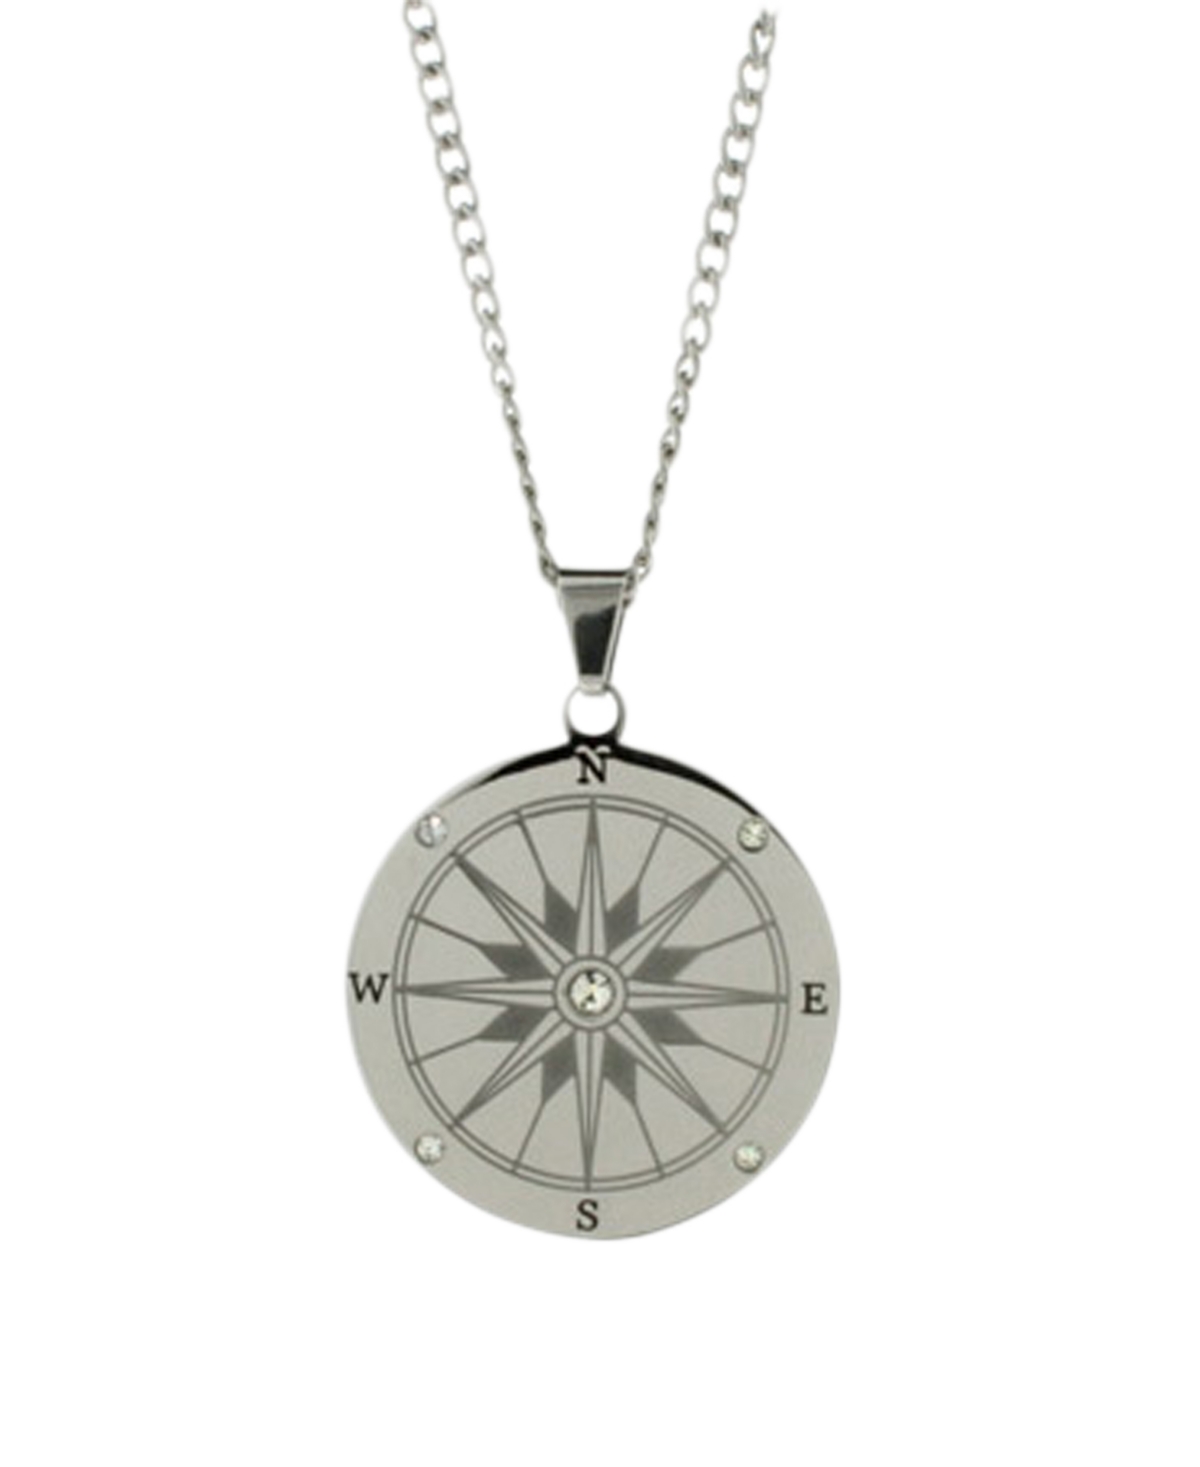 Eve's Jewelry Men's Stainless Steel Compass Necklace